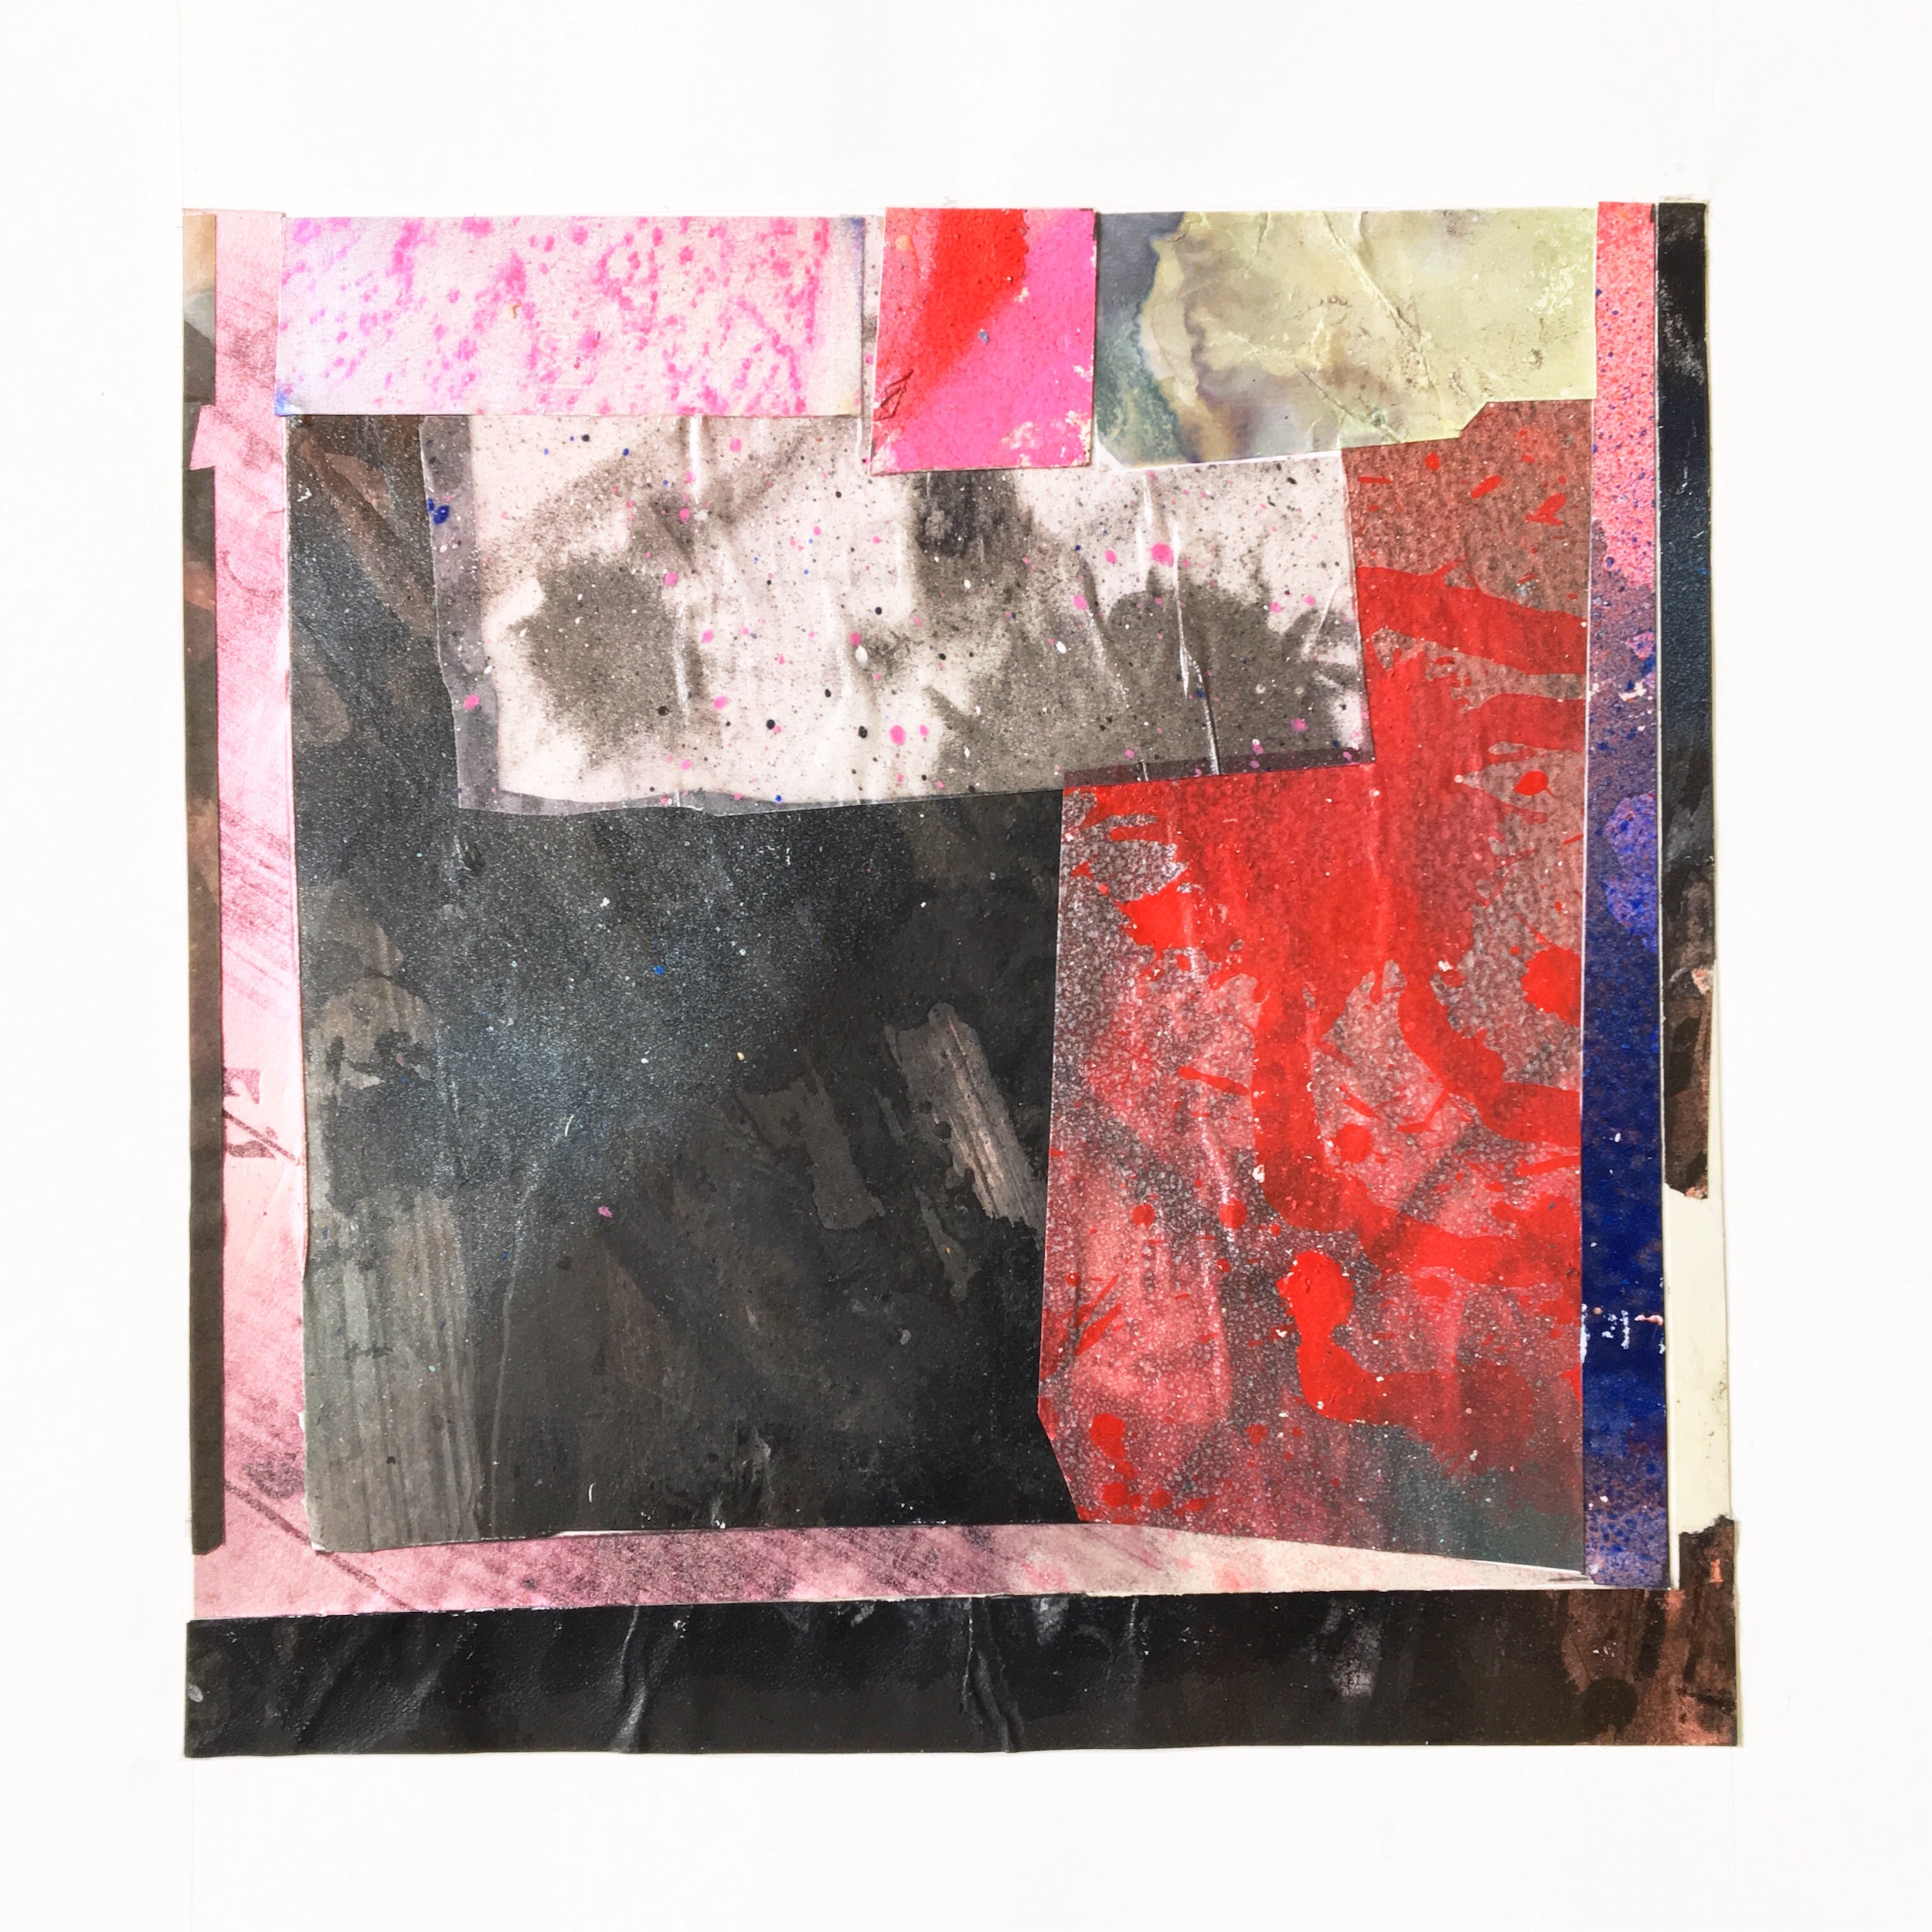  IAIN MUIRHEAD   18136:18160,   2018. Peripheral painting aggregate (2014-2018) collage on paper. 8 x 8 inches each. 